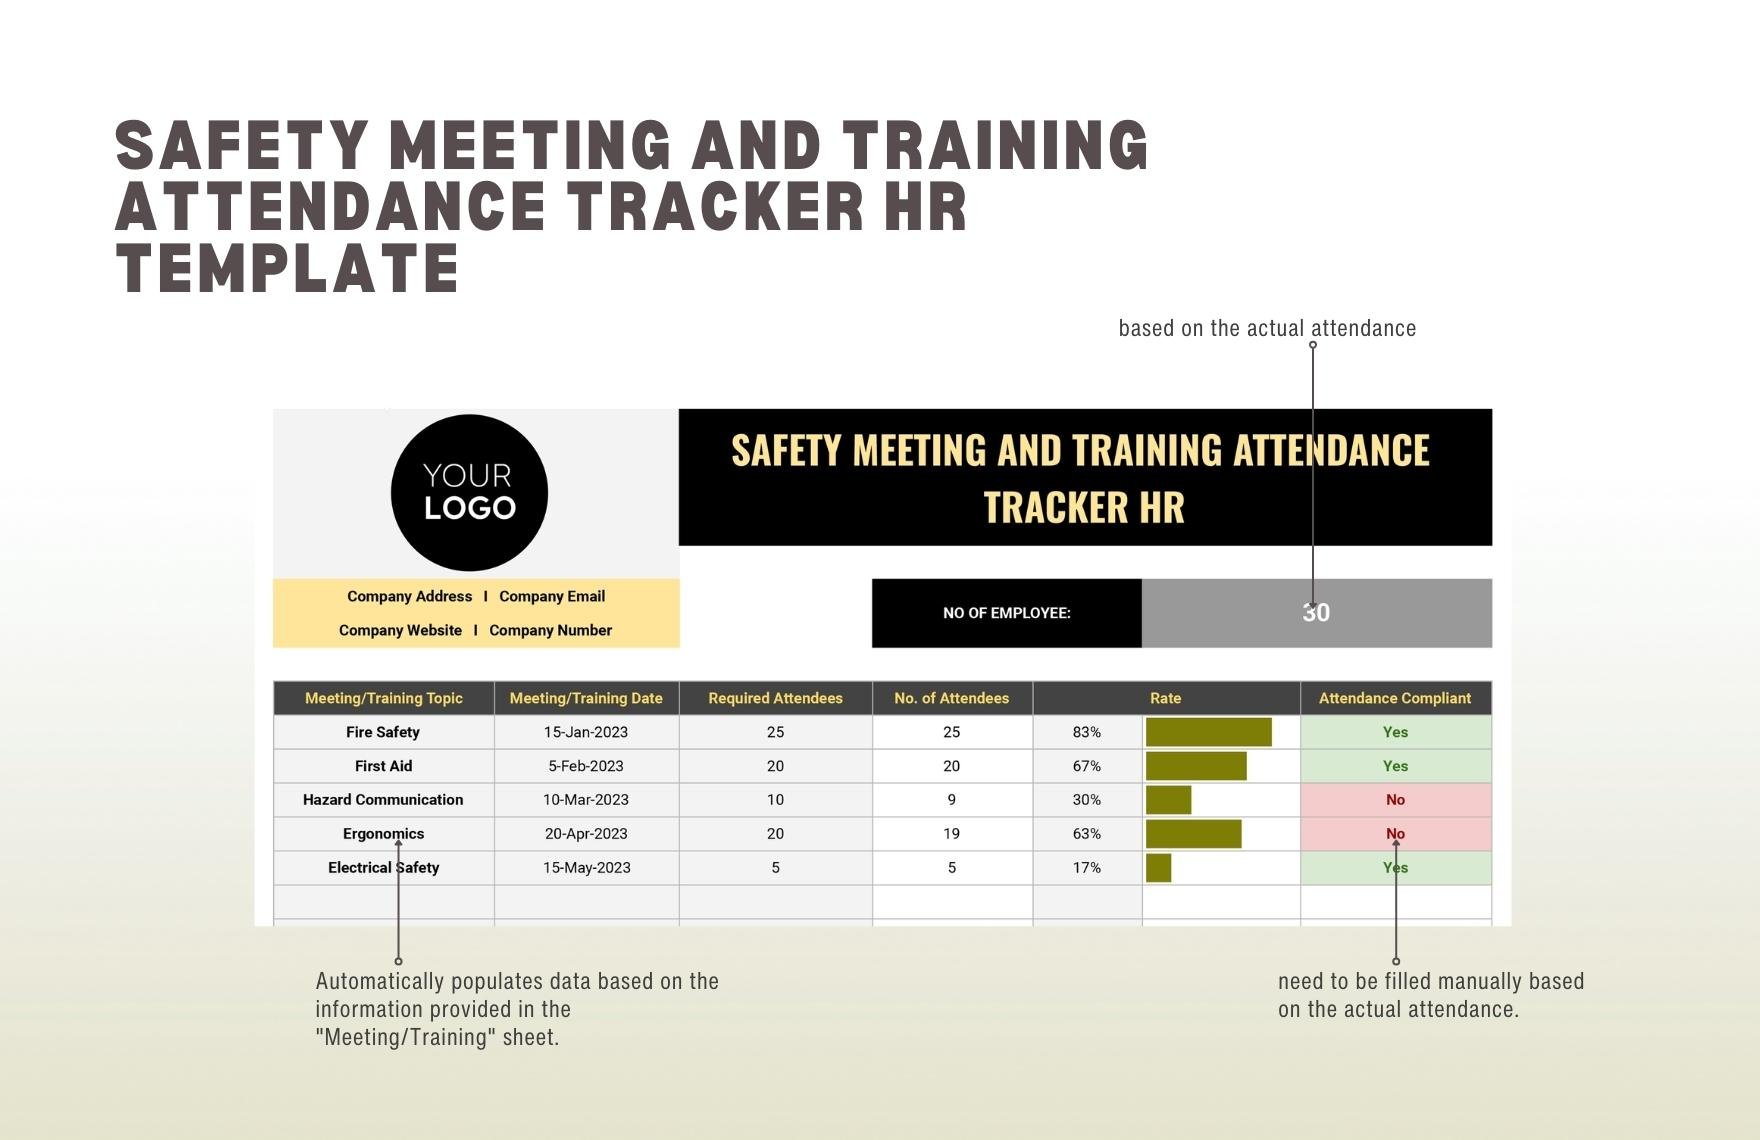 Safety Meeting and Training Attendance Tracker HR Template